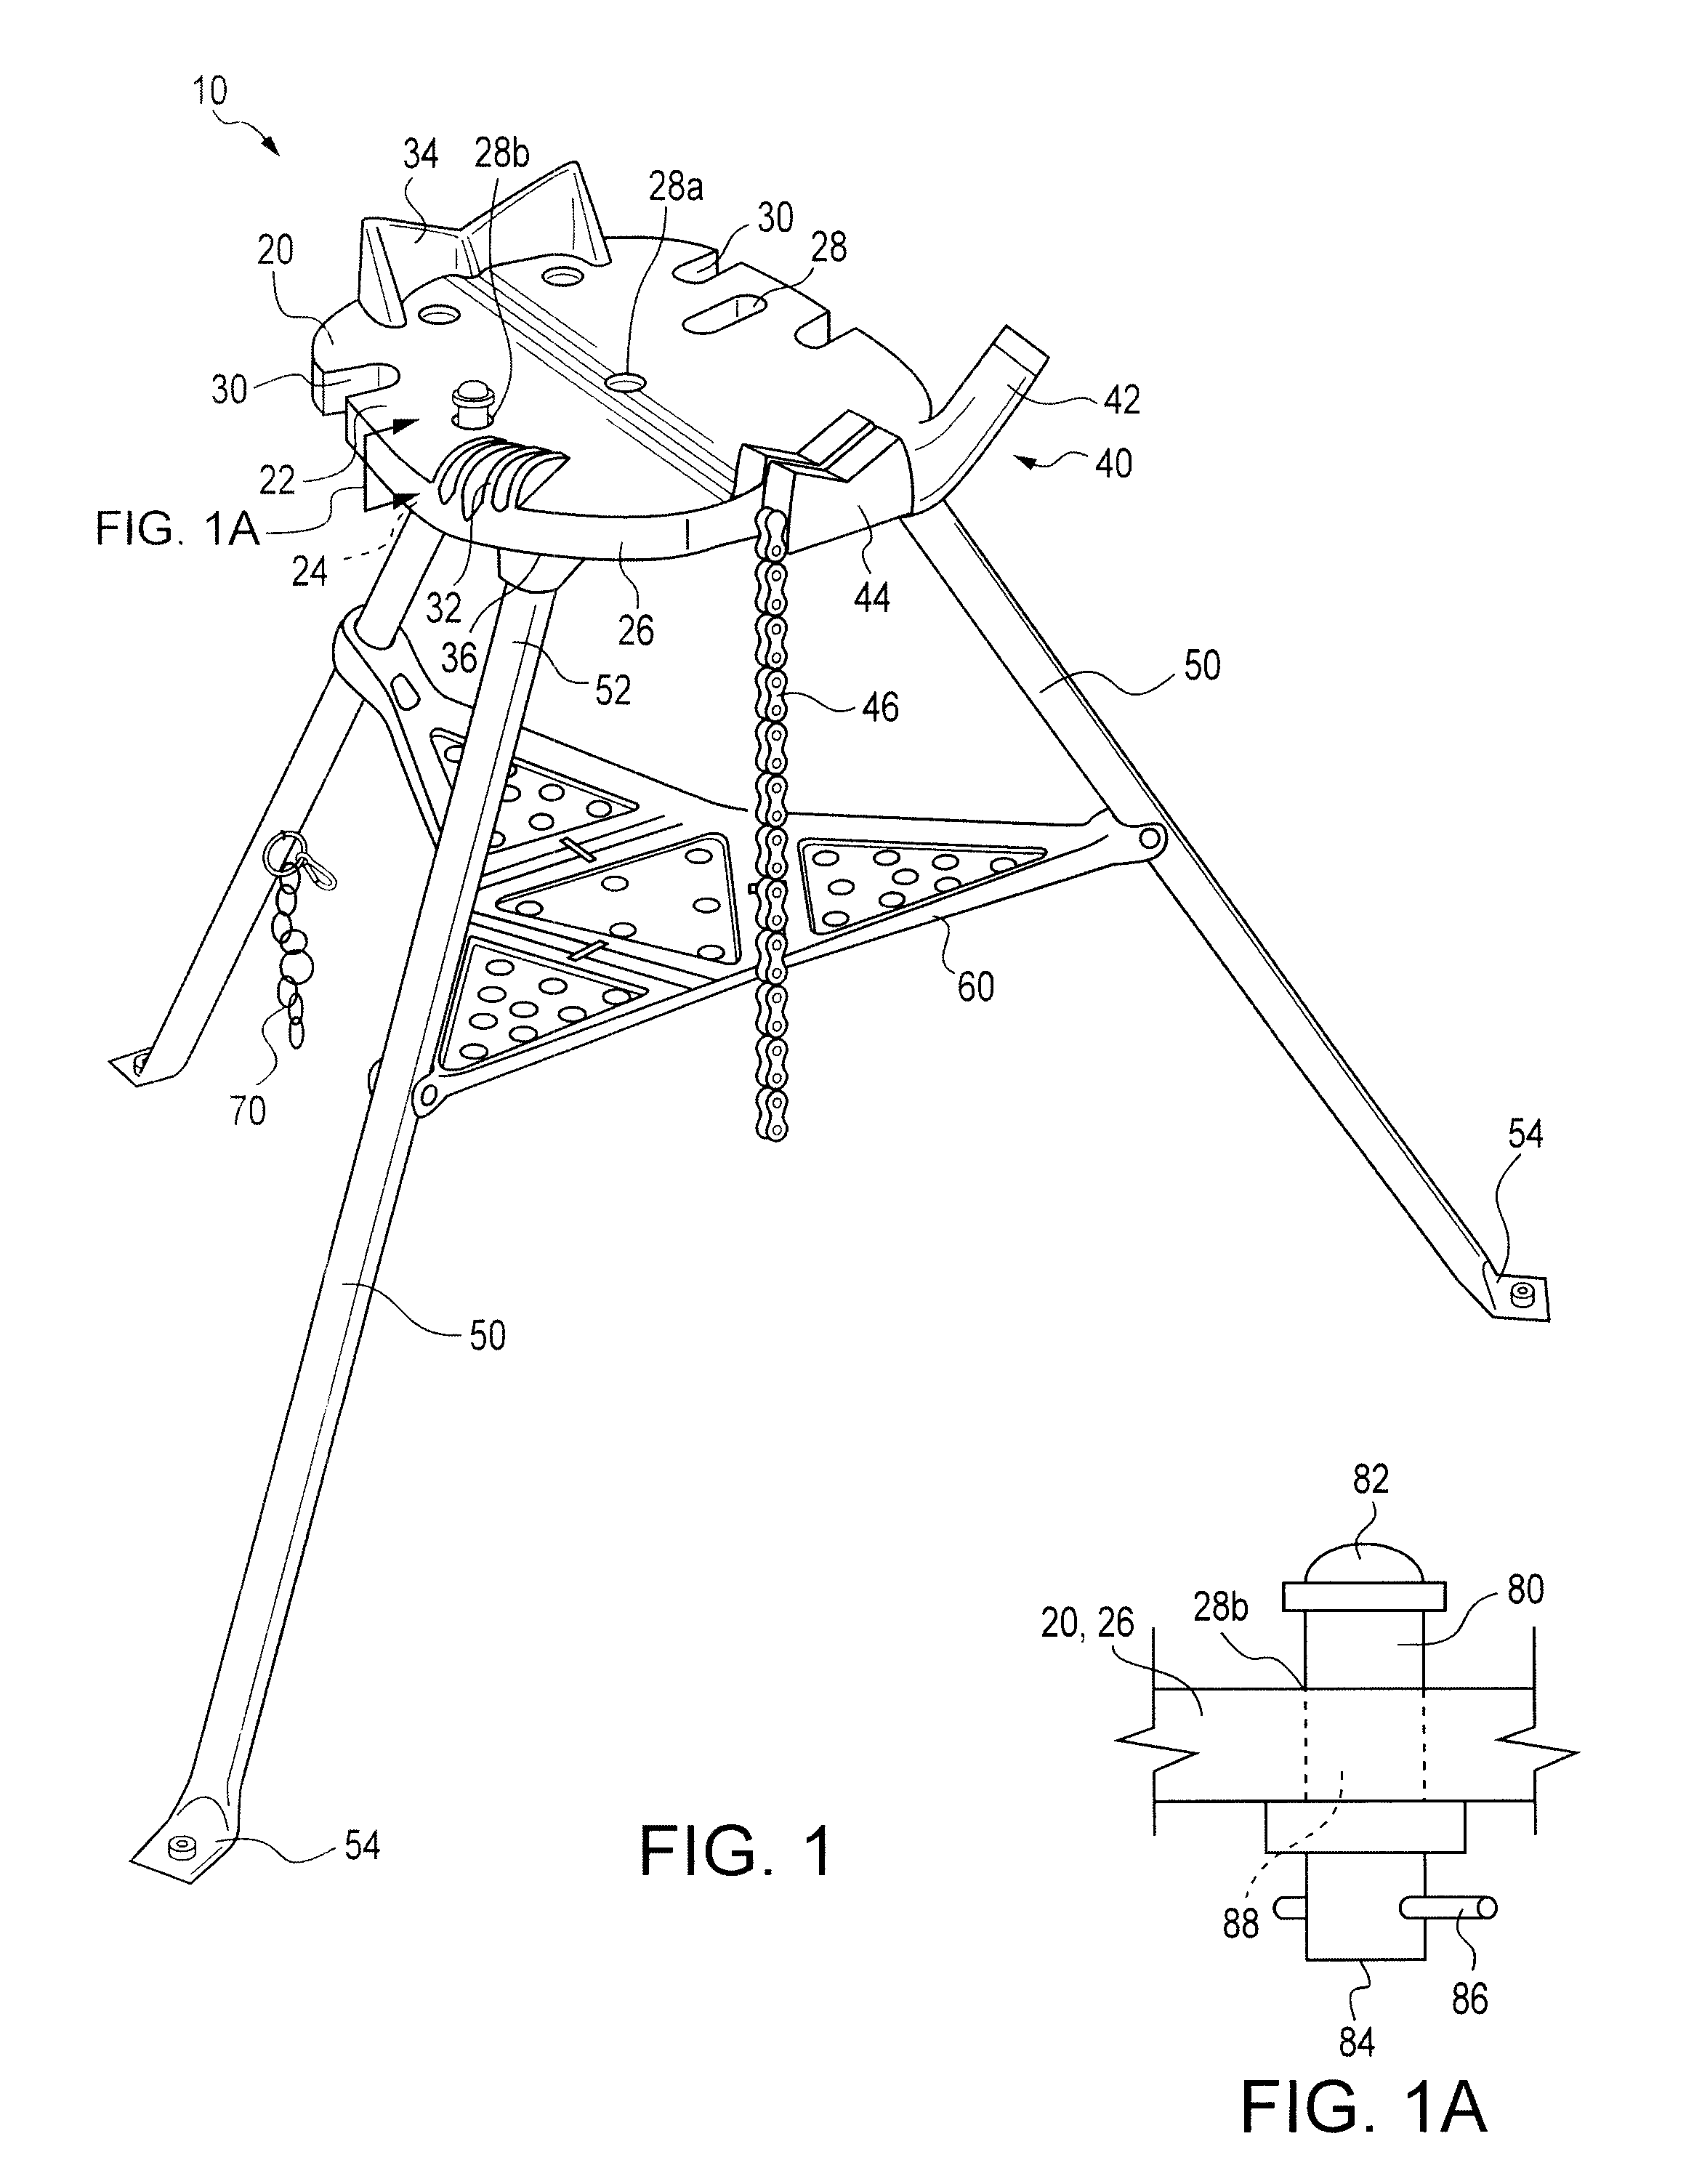 Pipe vise stands and components for increasing capacity thereof